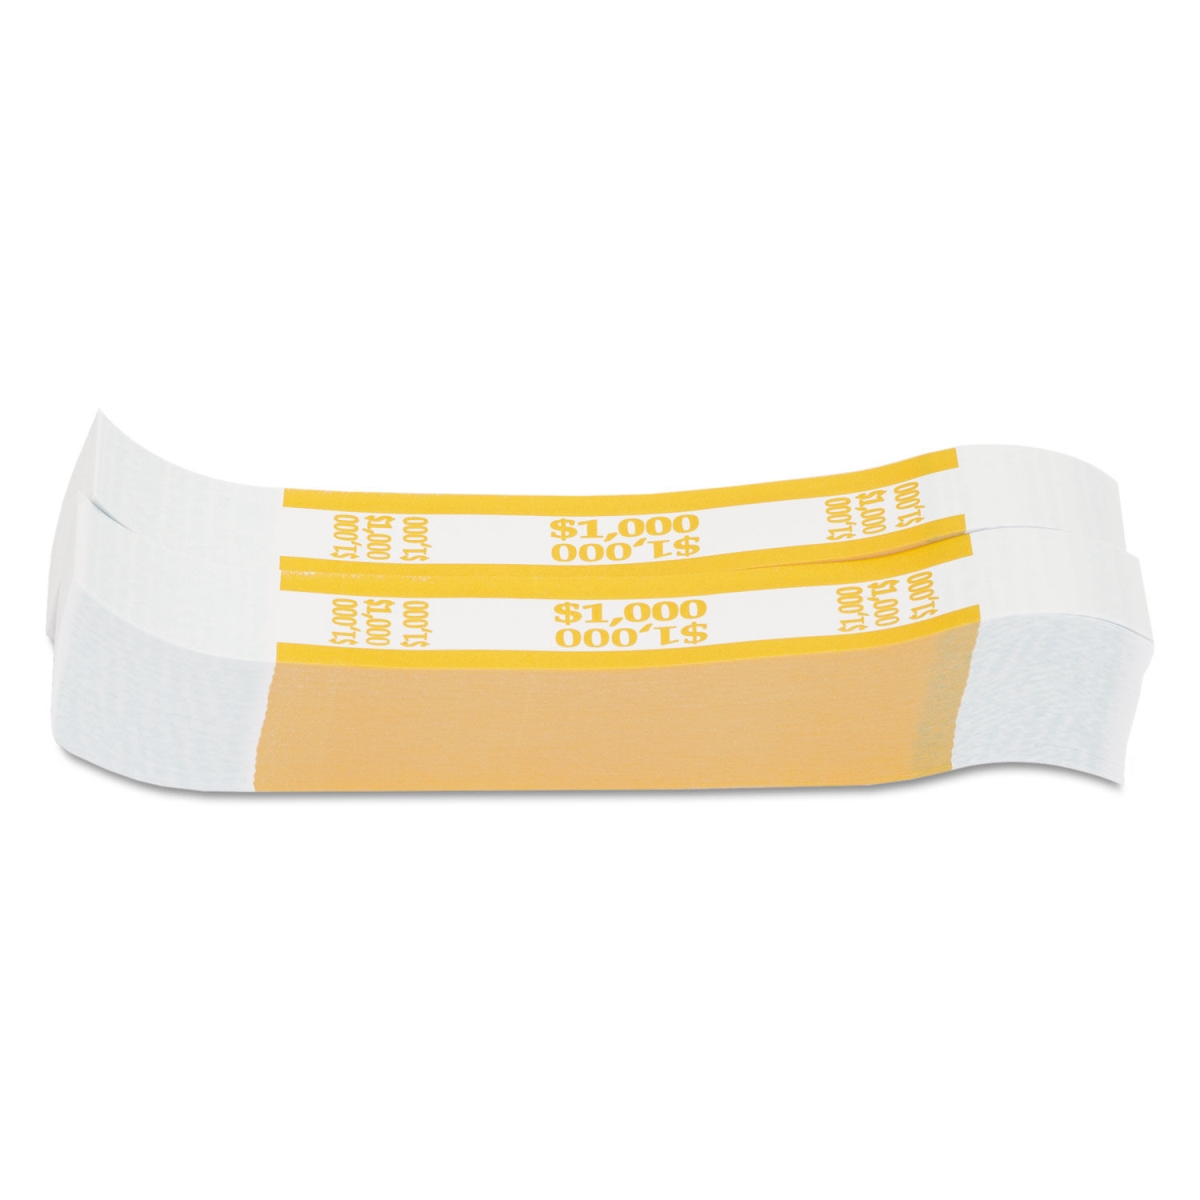 Picture of Pap CTX401000 1000 Dollar Bills Currency Strap, Yellow